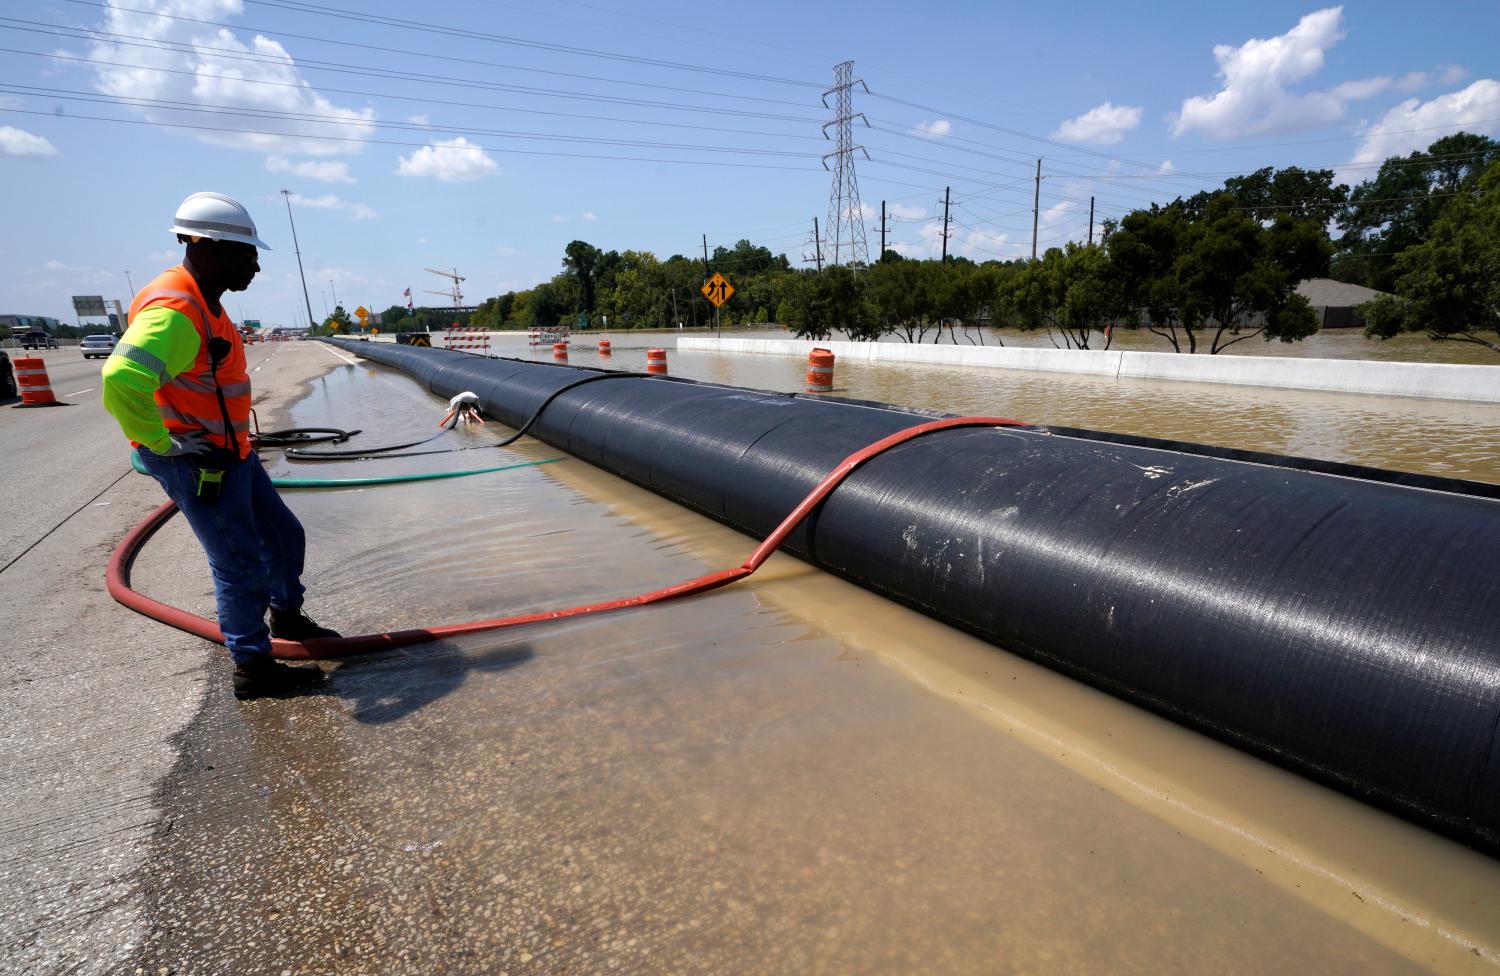 A Texas Department of Transportation worker monitors a temporary water filled dam keeping Harvey floodwaters from getting onto highway I-10 in Houston, Texas August 31, 2017. REUTERS/Rick Wilking - RC1FDAADF450